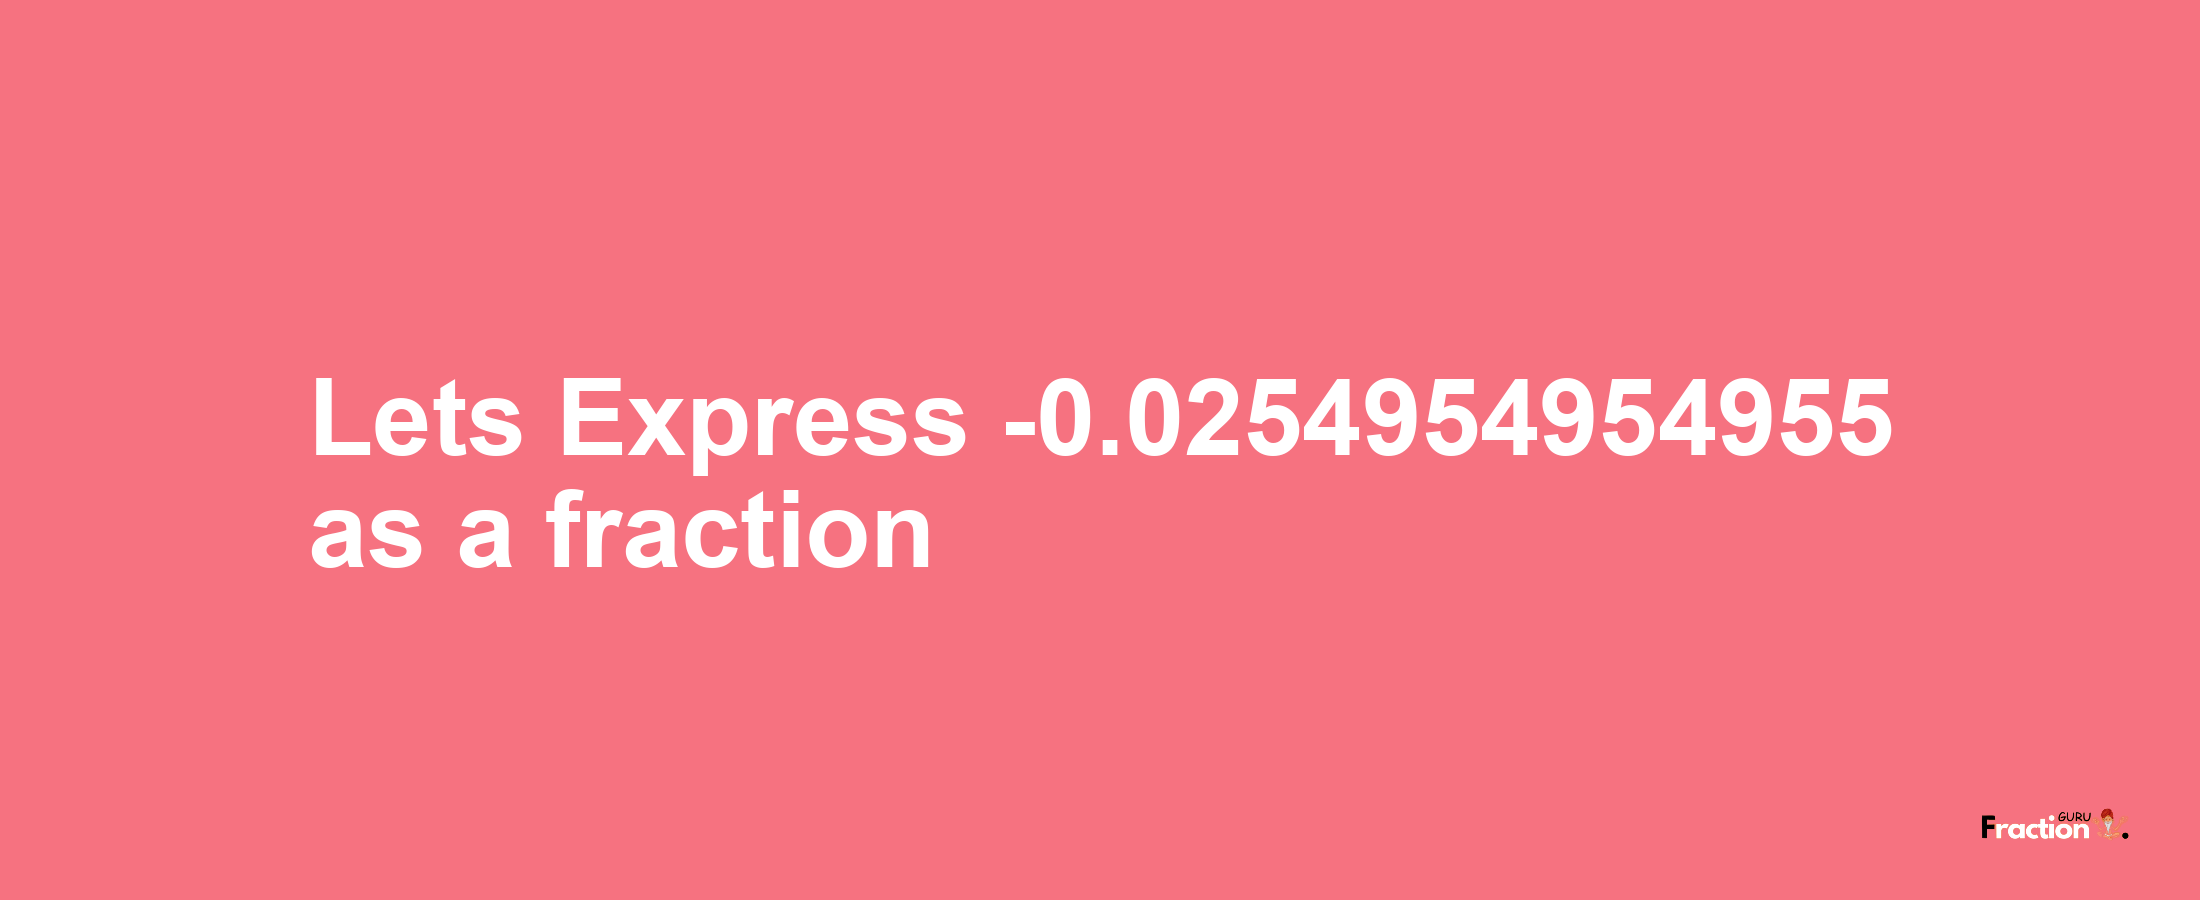 Lets Express -0.0254954954955 as afraction